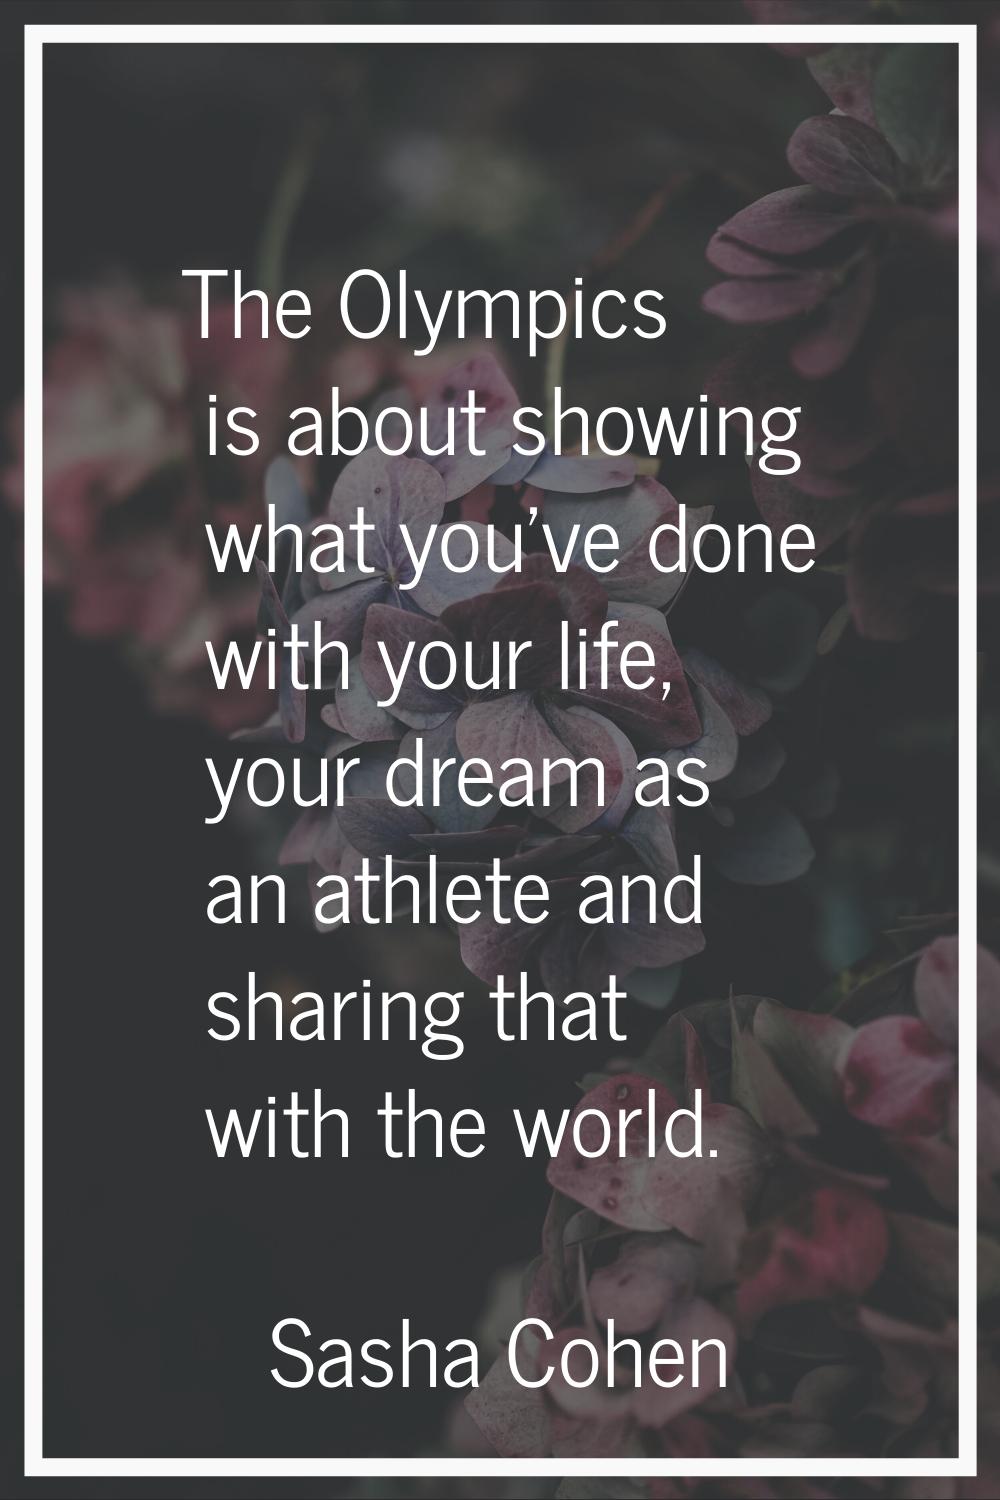 The Olympics is about showing what you've done with your life, your dream as an athlete and sharing